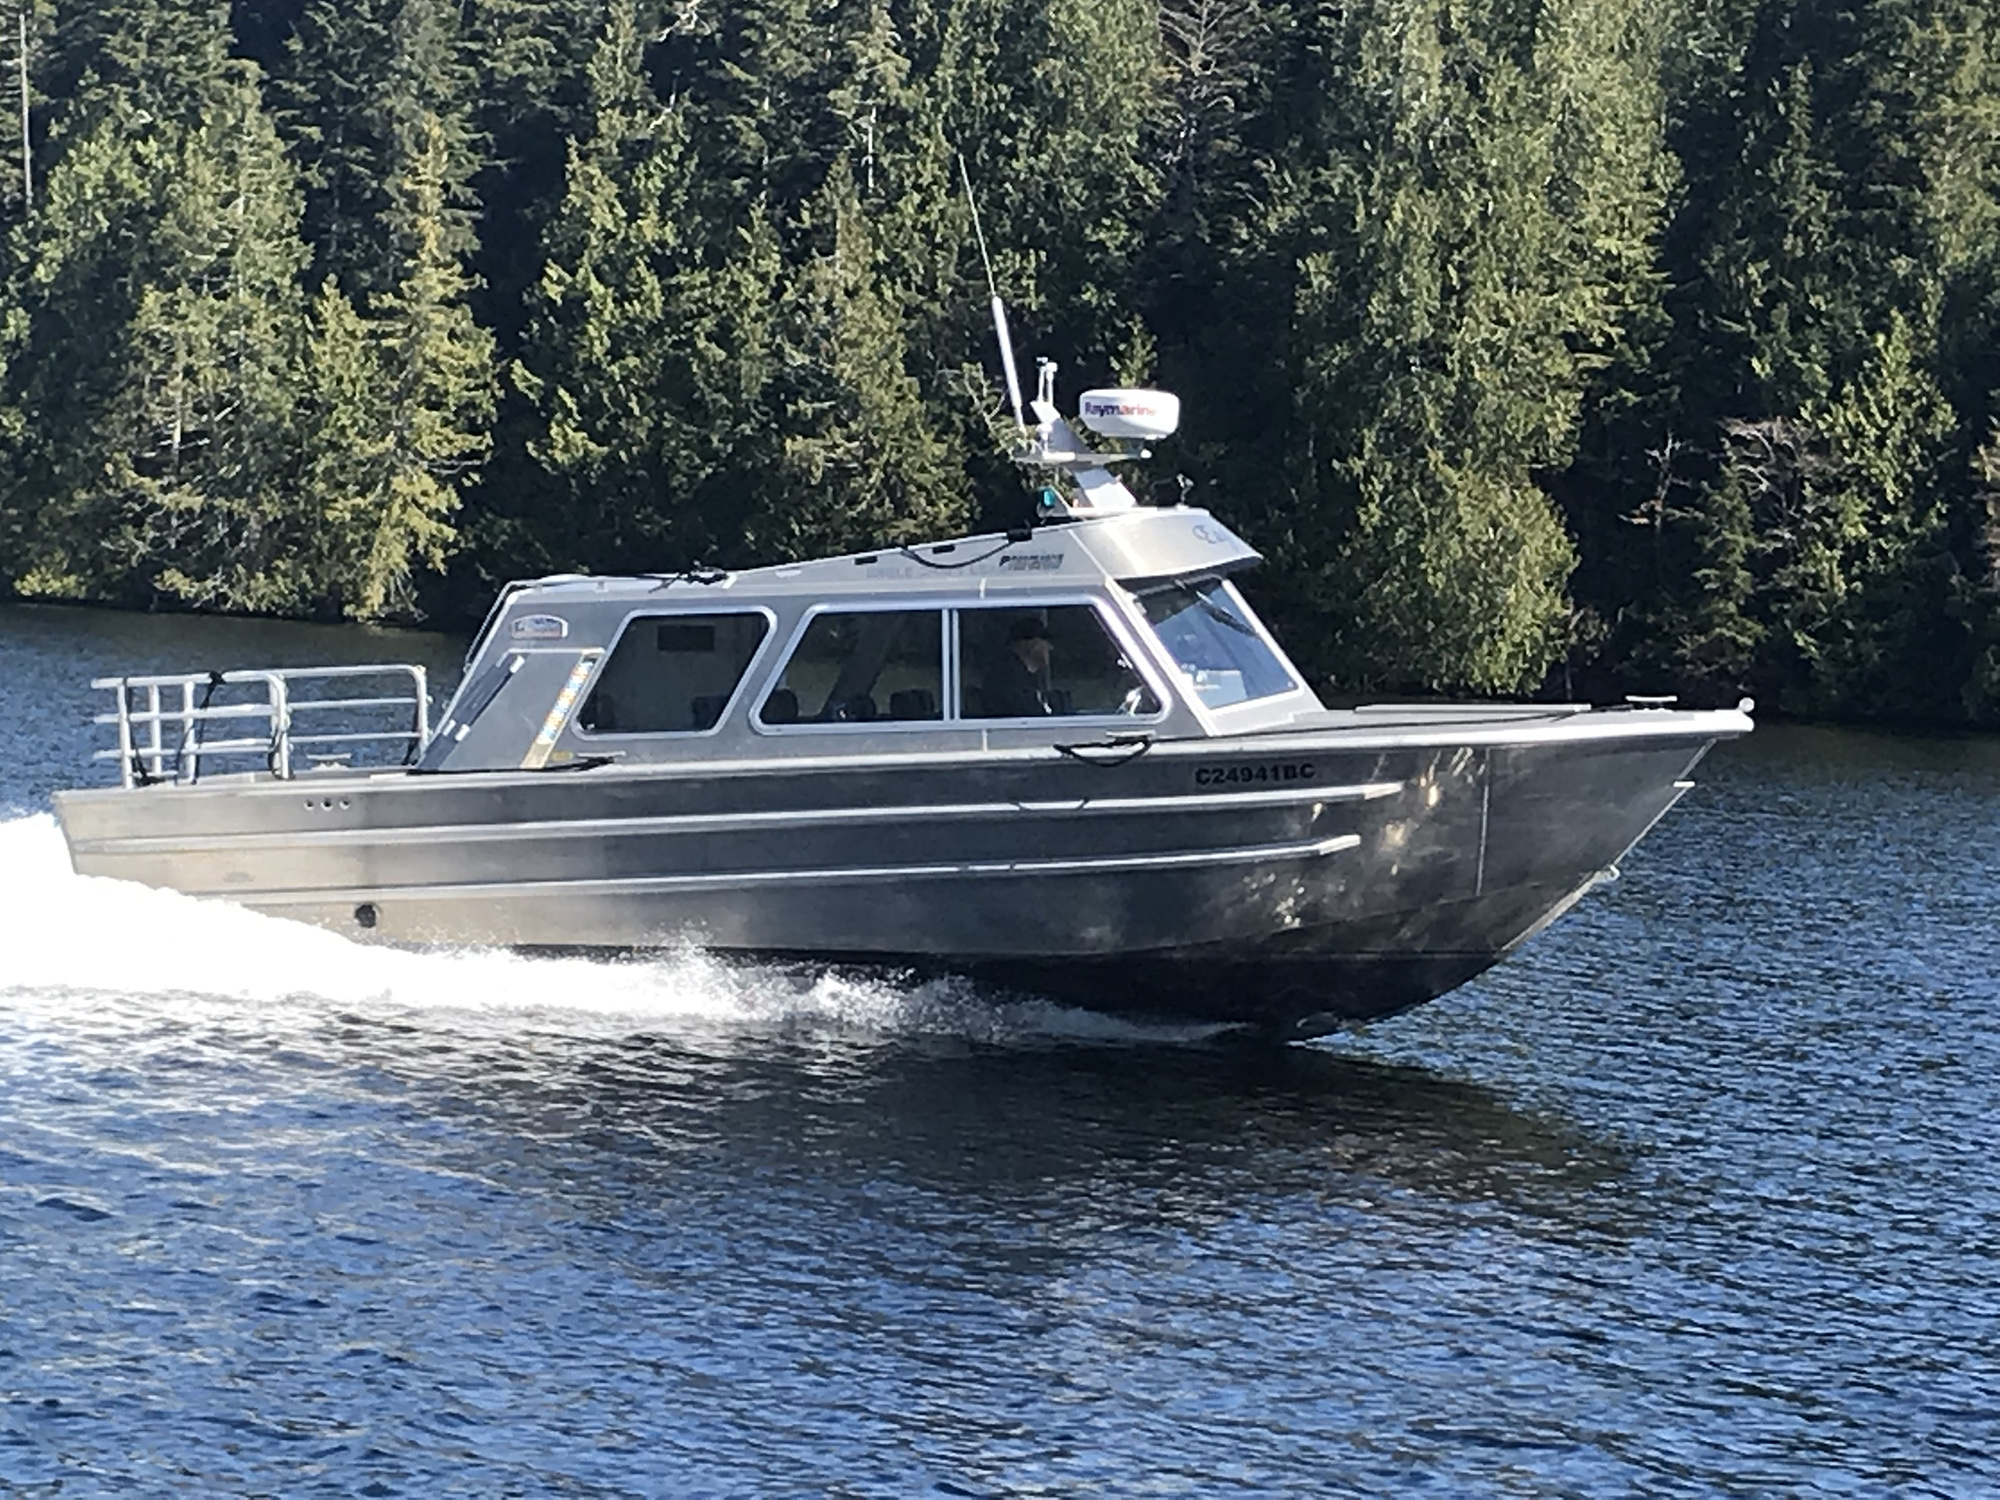 NorthVancouver Island Water Taxi